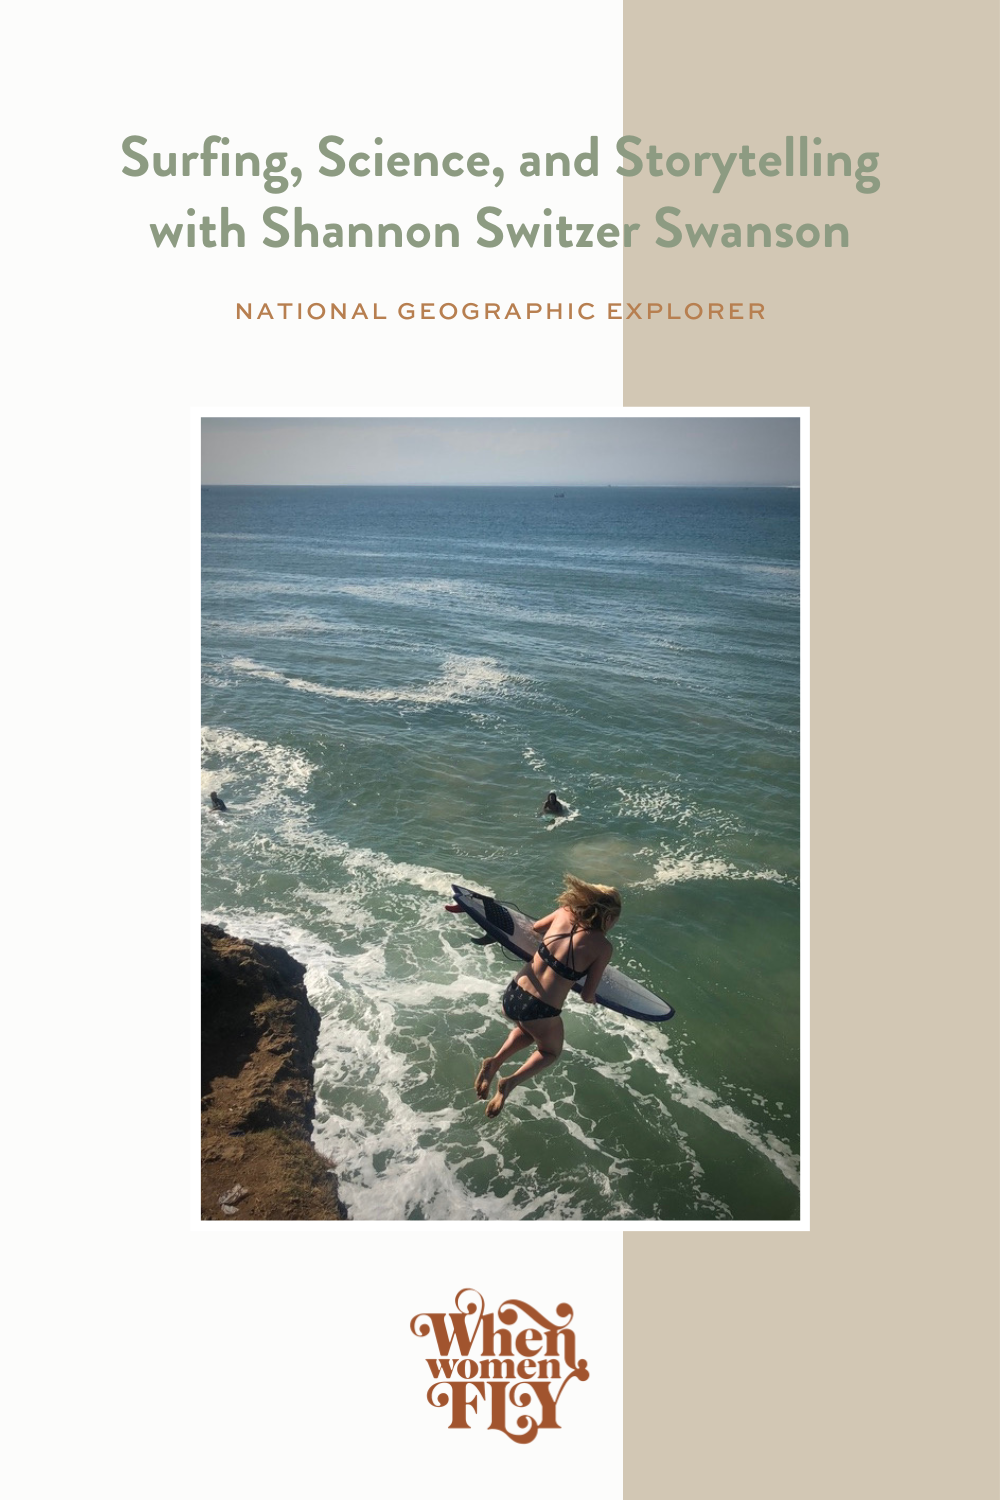 Surfing, Science, and Storytelling with National Geographic Explorer Shannon Switzer Swanson